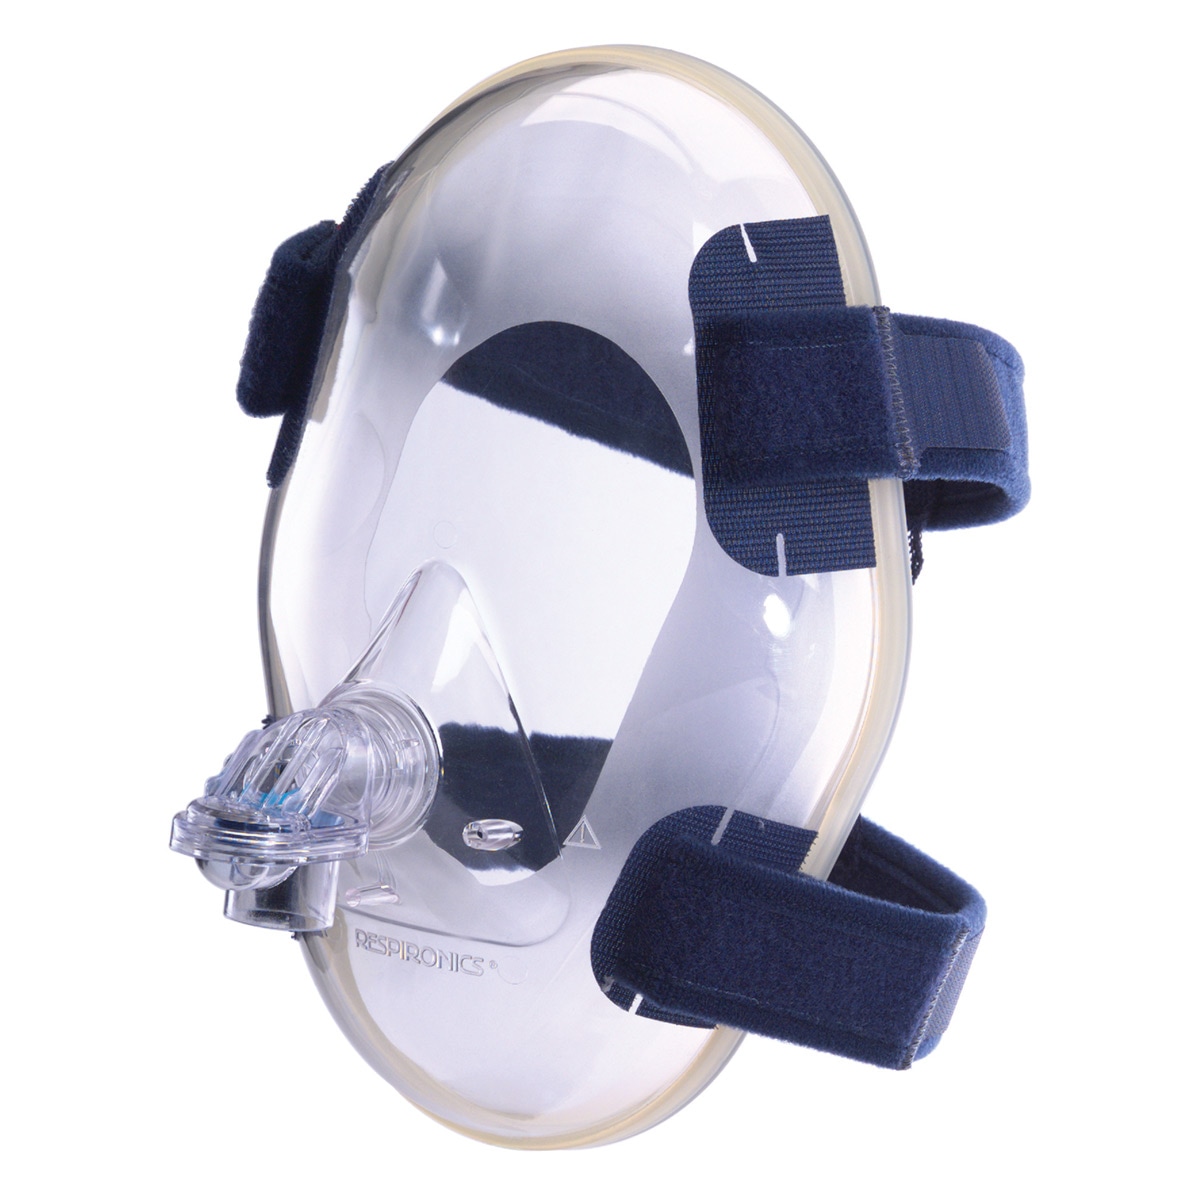 Philips Respironics Total Face Mask Discontinued Ships Free